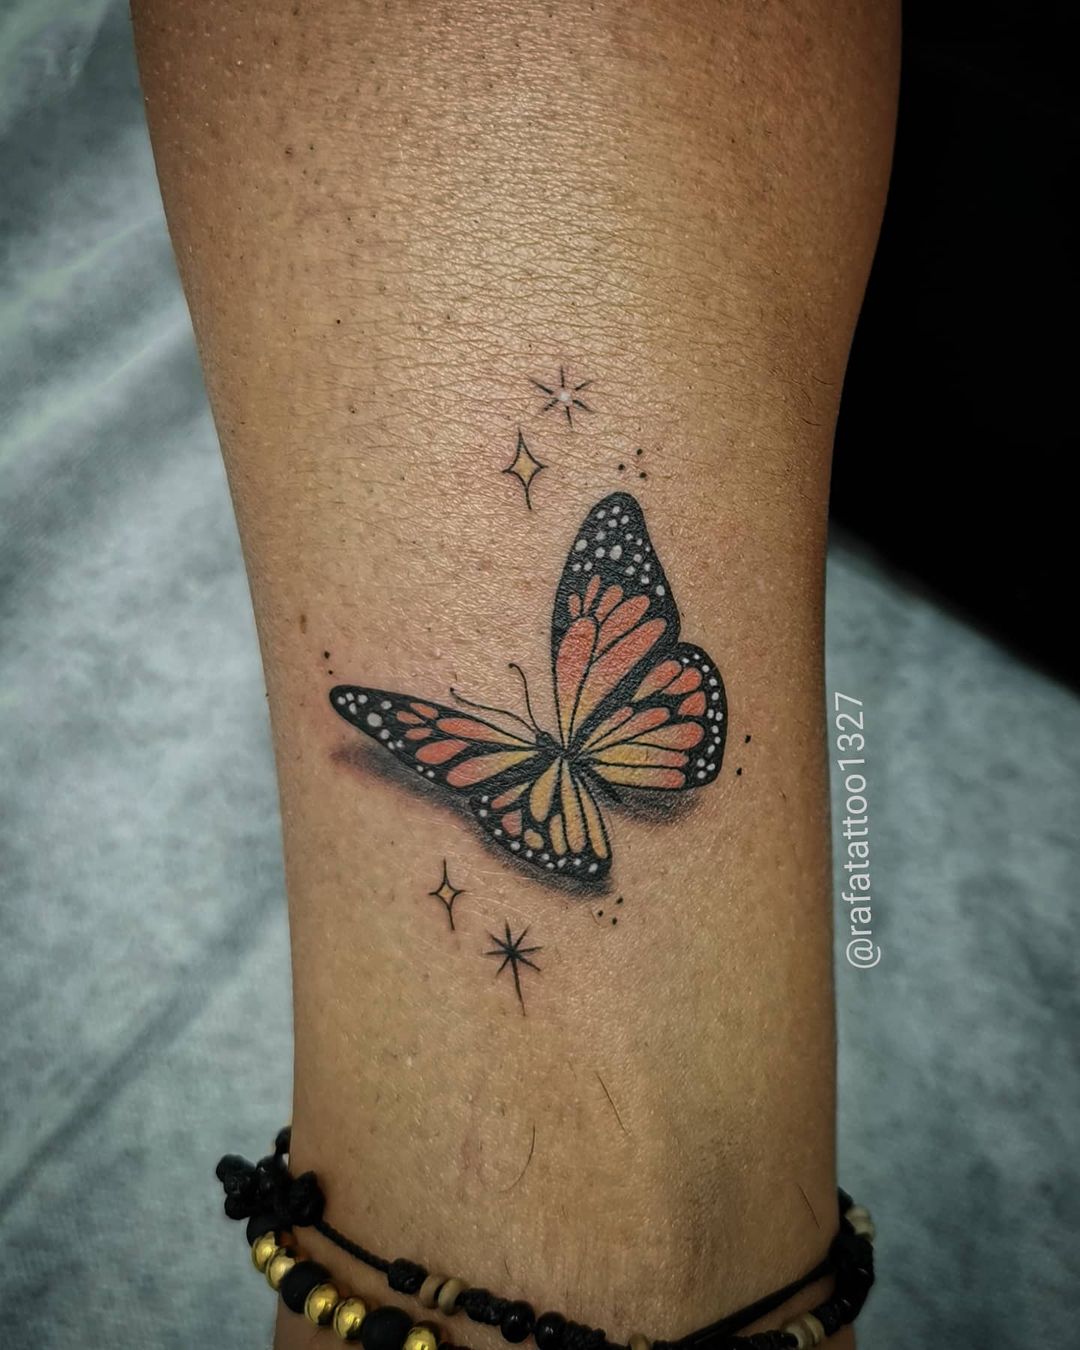 30+ Best Butterfly Tattoos Design You’ll Love To Get Next. This is the Monarch Butterfly Tattoo